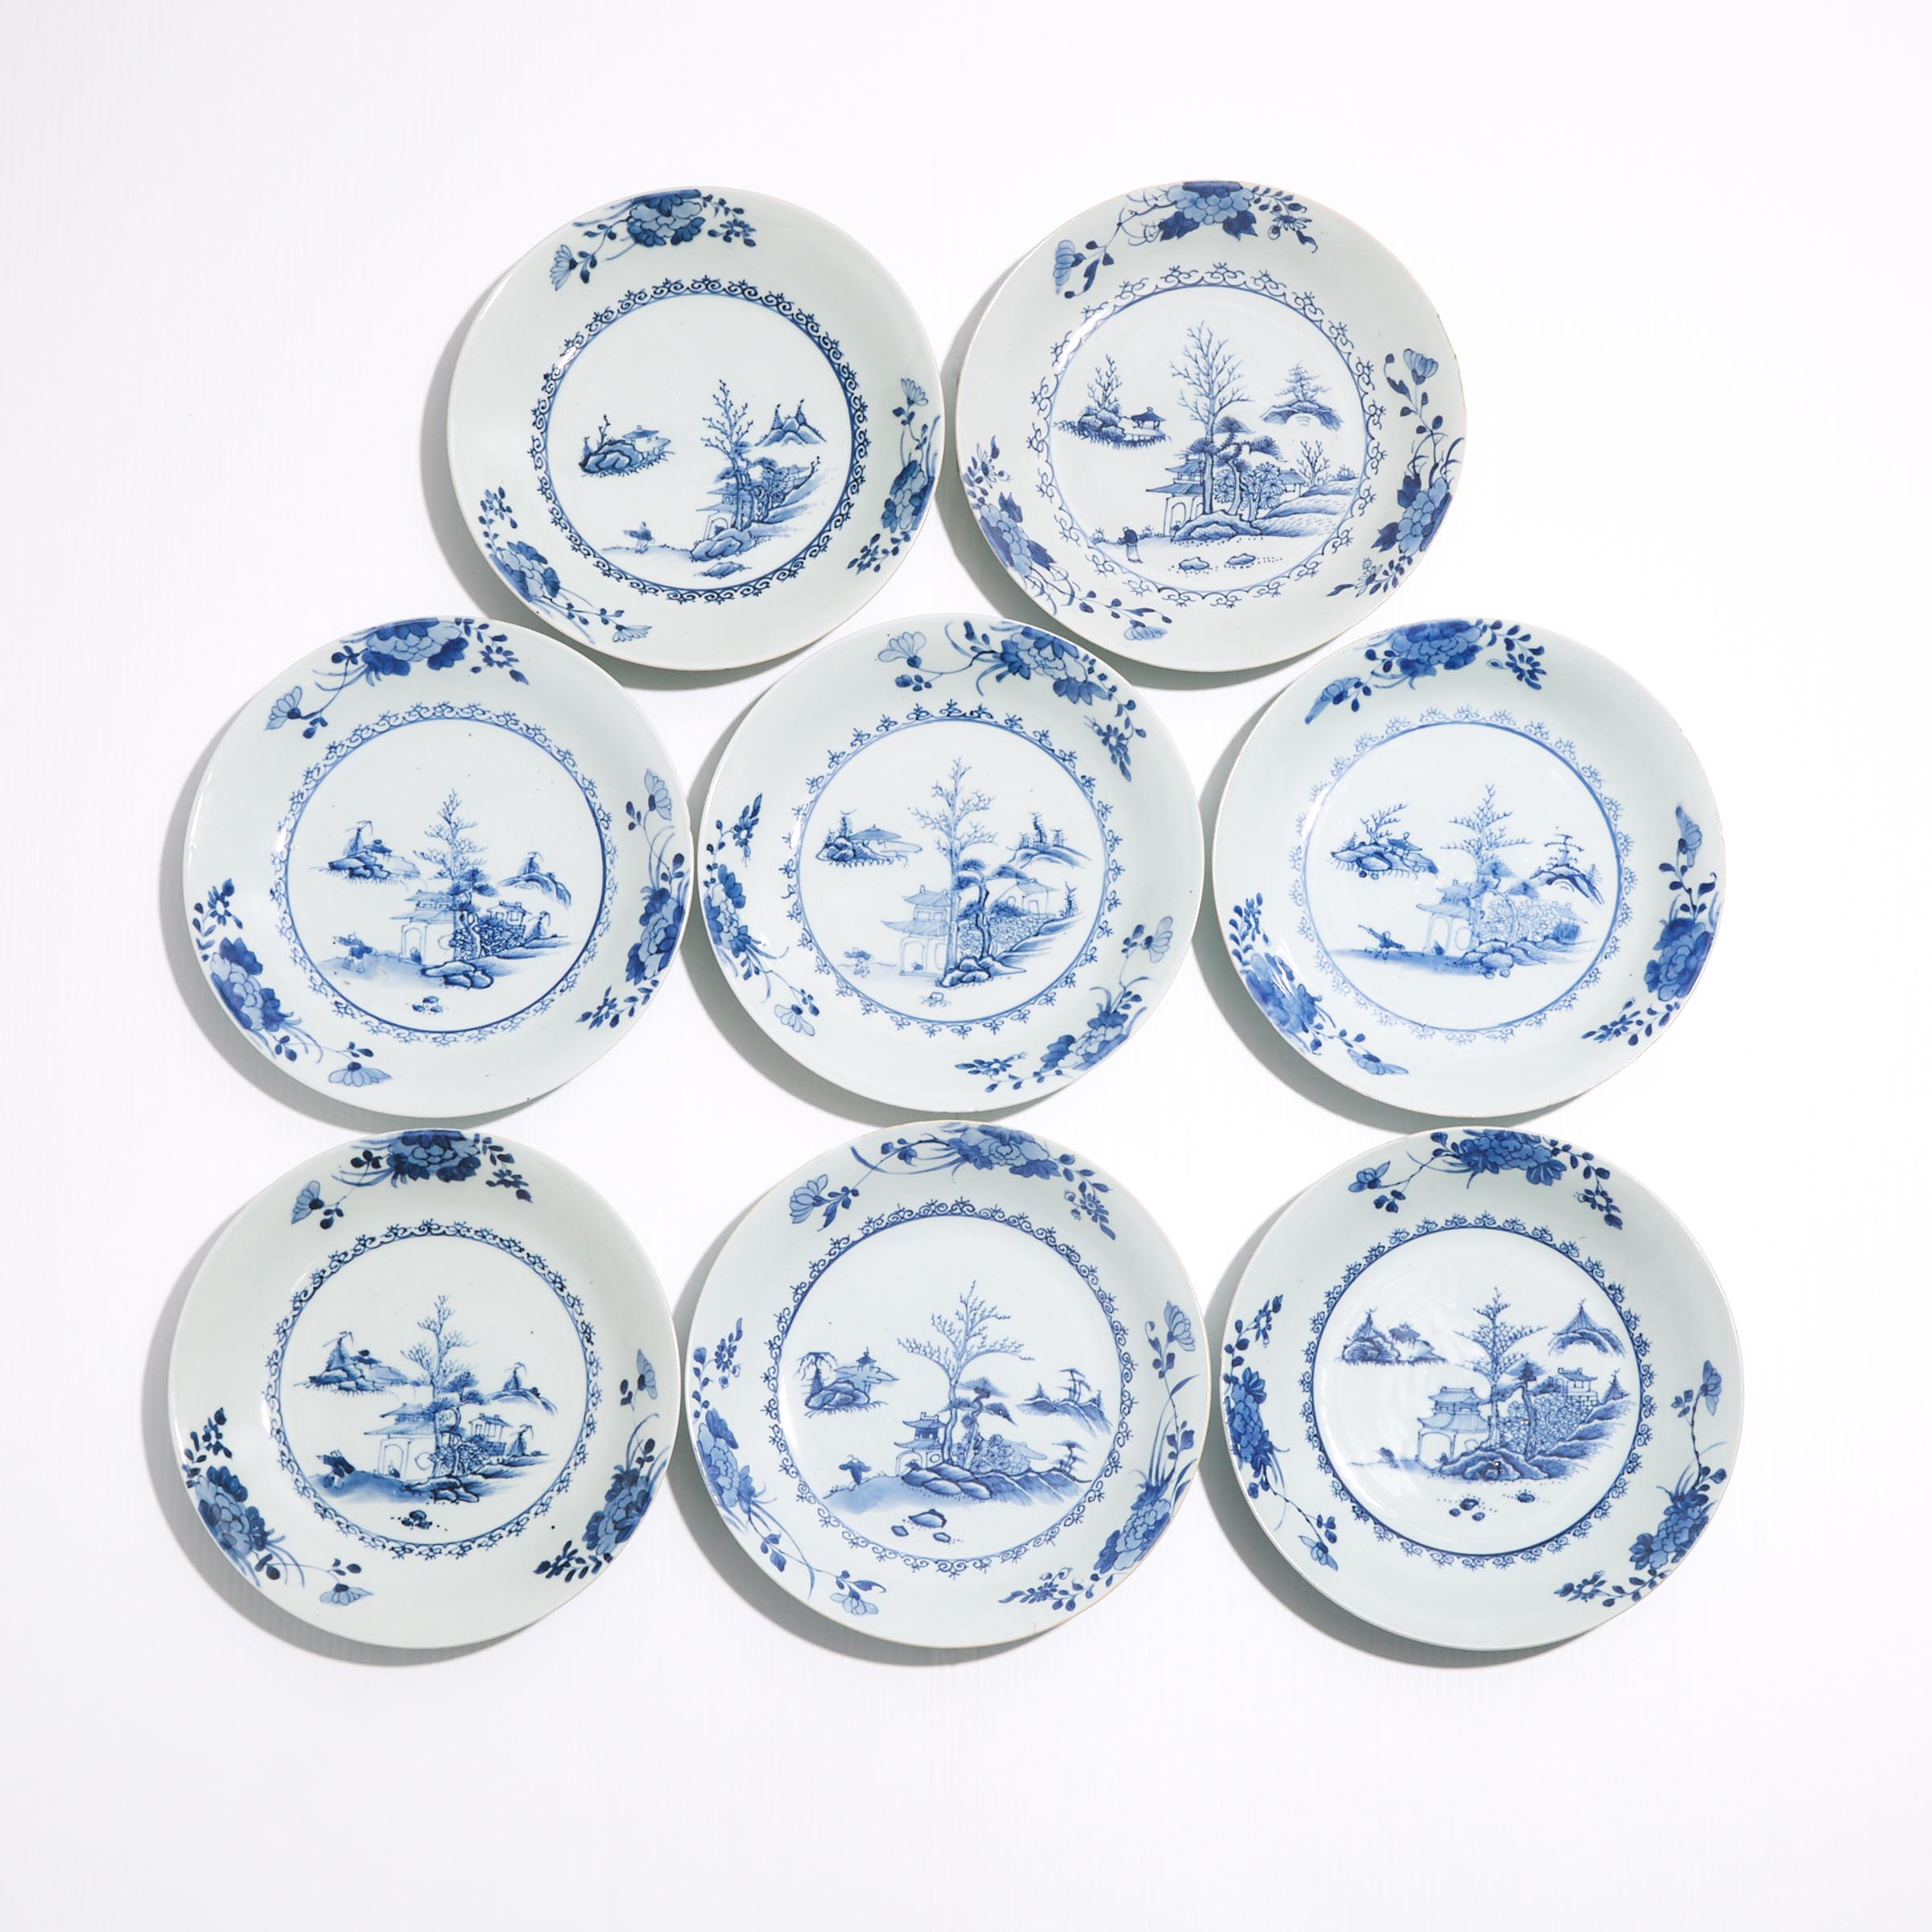 A Set of Eight 'Leaping Boy' Pattern Saucer Dishes from the Nanking Cargo, Qianlong Period, Circa 1750